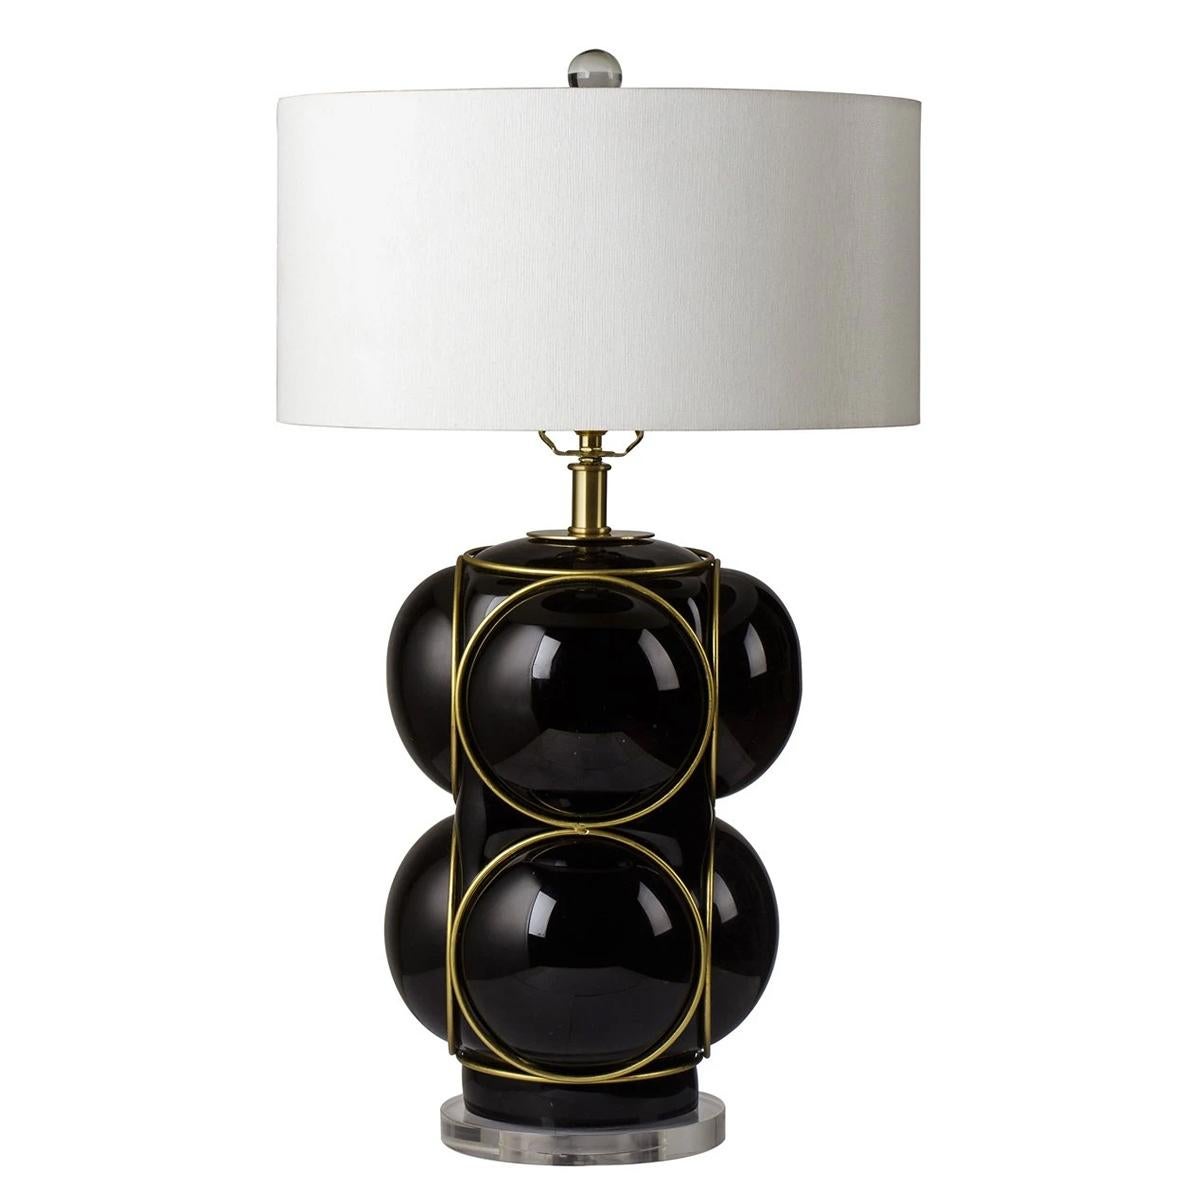 Table lamp walberg black with black glass base with
brass trims. On plexiglass round base. 1 bulb, lamp
holder type E27, max 40 watt. 220 Volt. Bulb not included.
Including a white coton shade.